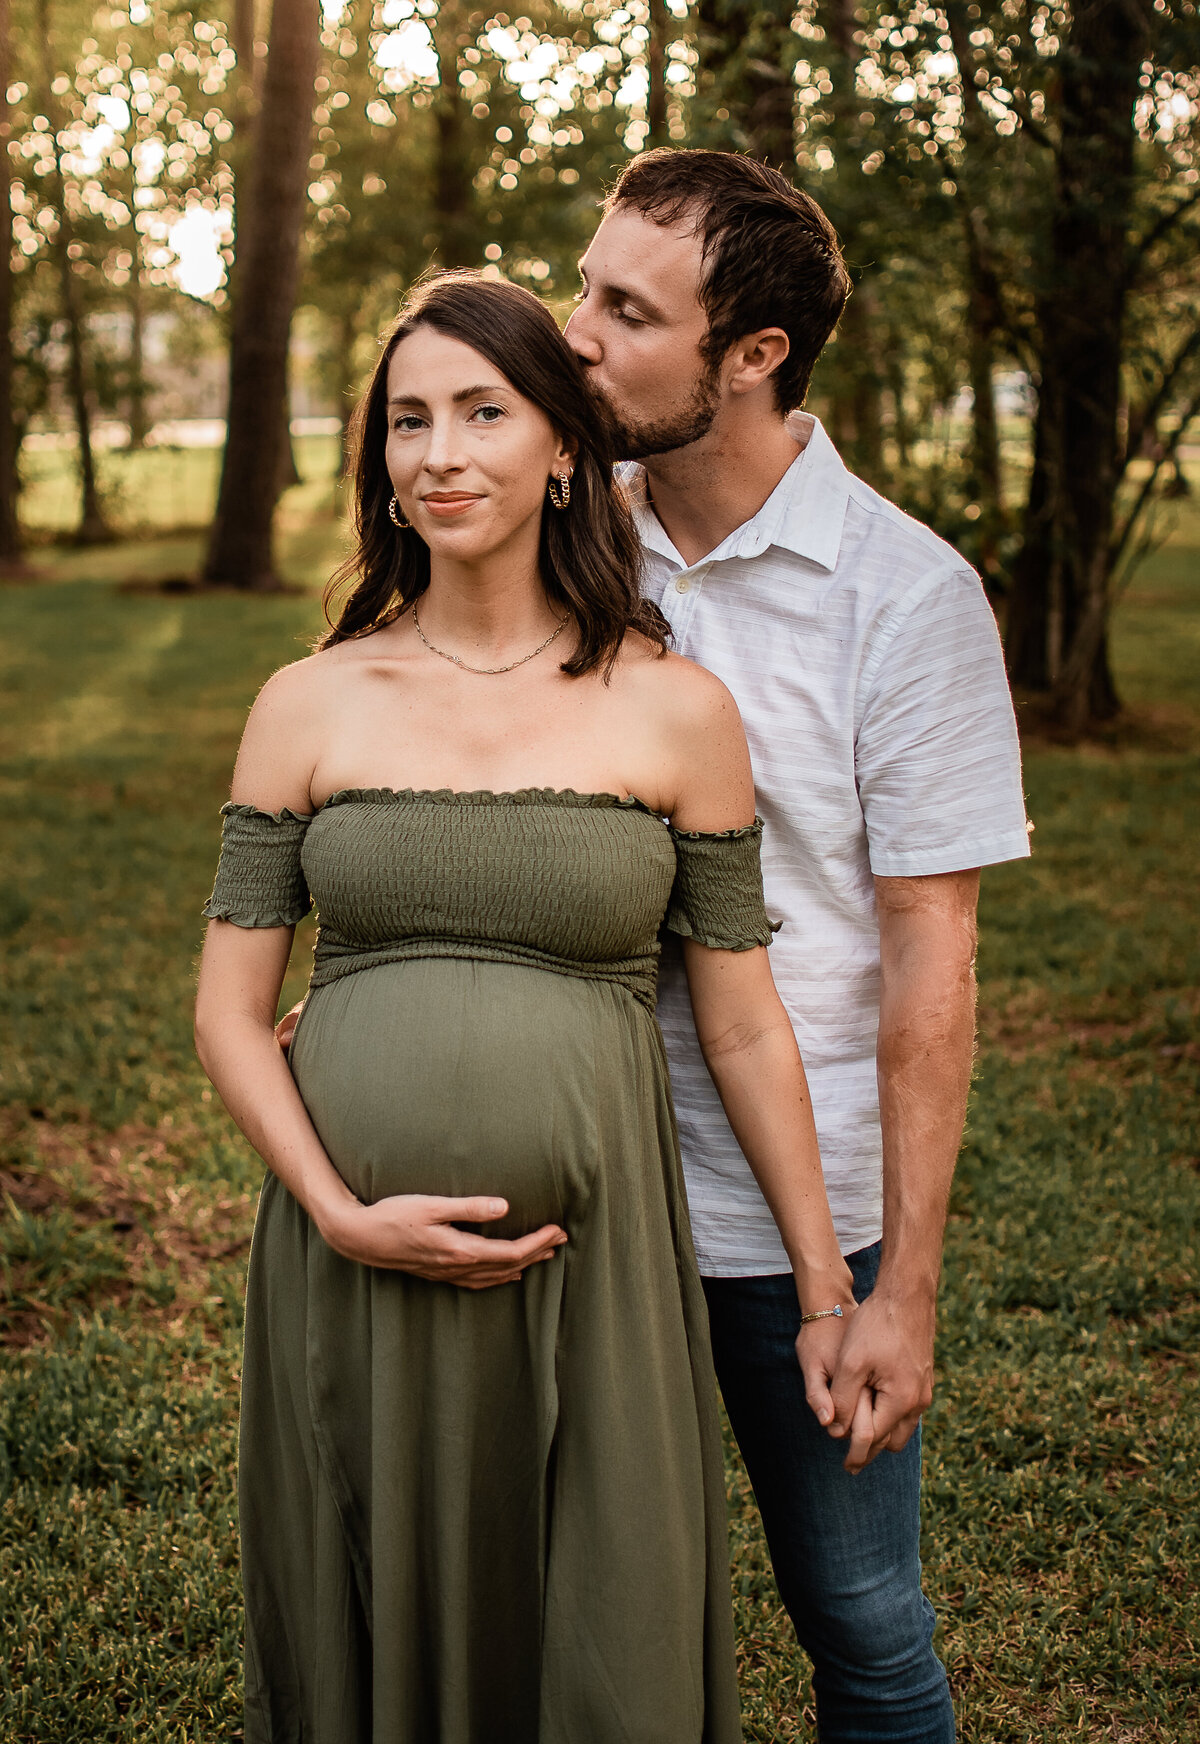 A mom to be wearing green smiles at the camera as her husband kisses the side of her head.